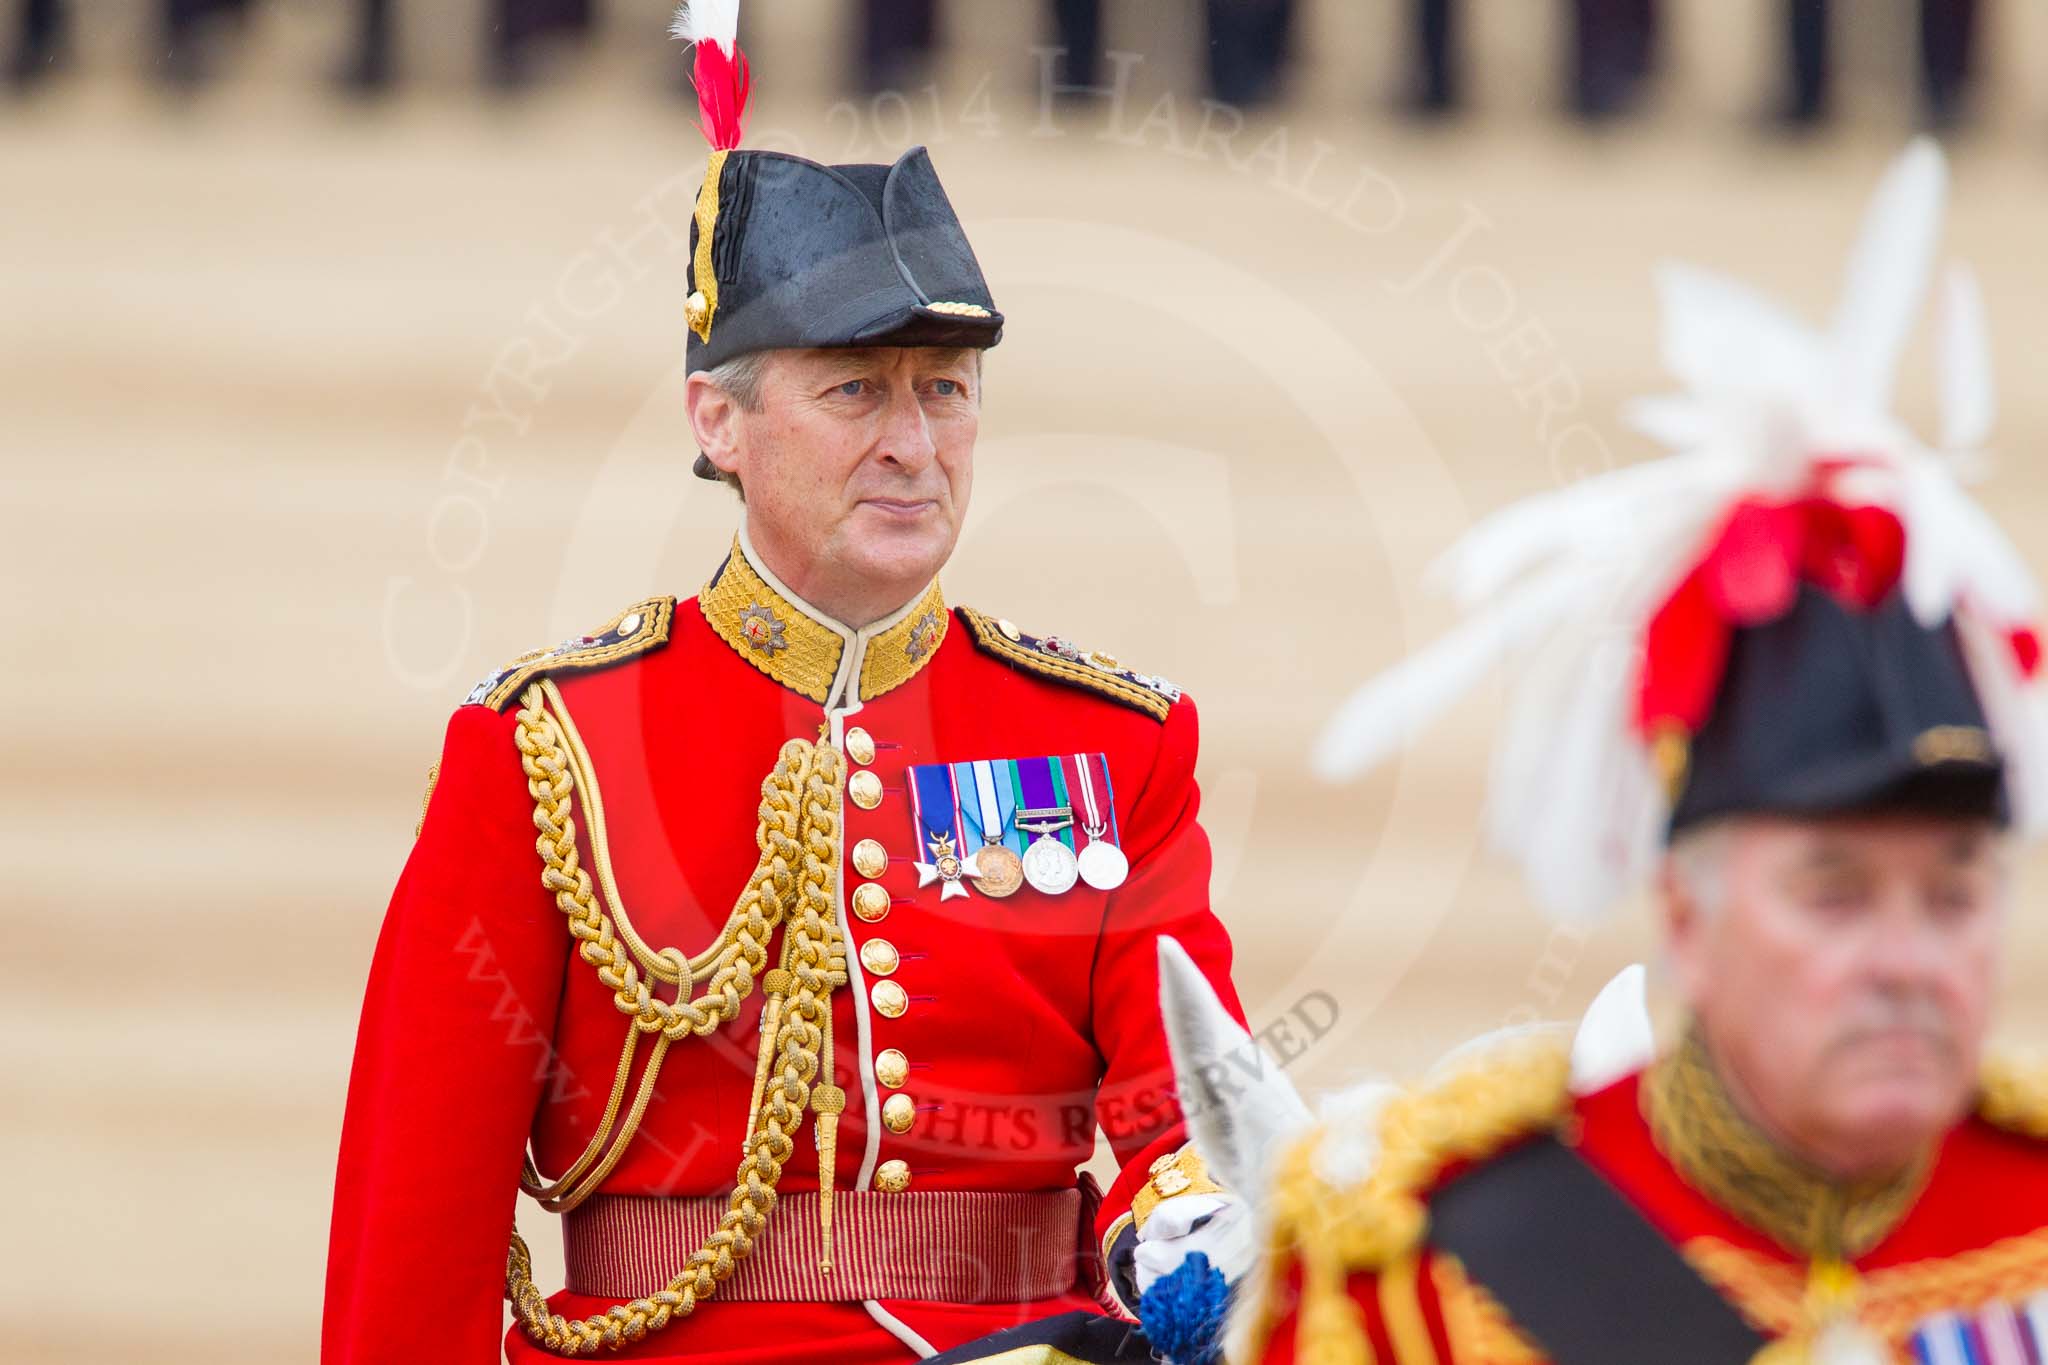 Trooping the Colour 2014.
Horse Guards Parade, Westminster,
London SW1A,

United Kingdom,
on 14 June 2014 at 11:07, image #438